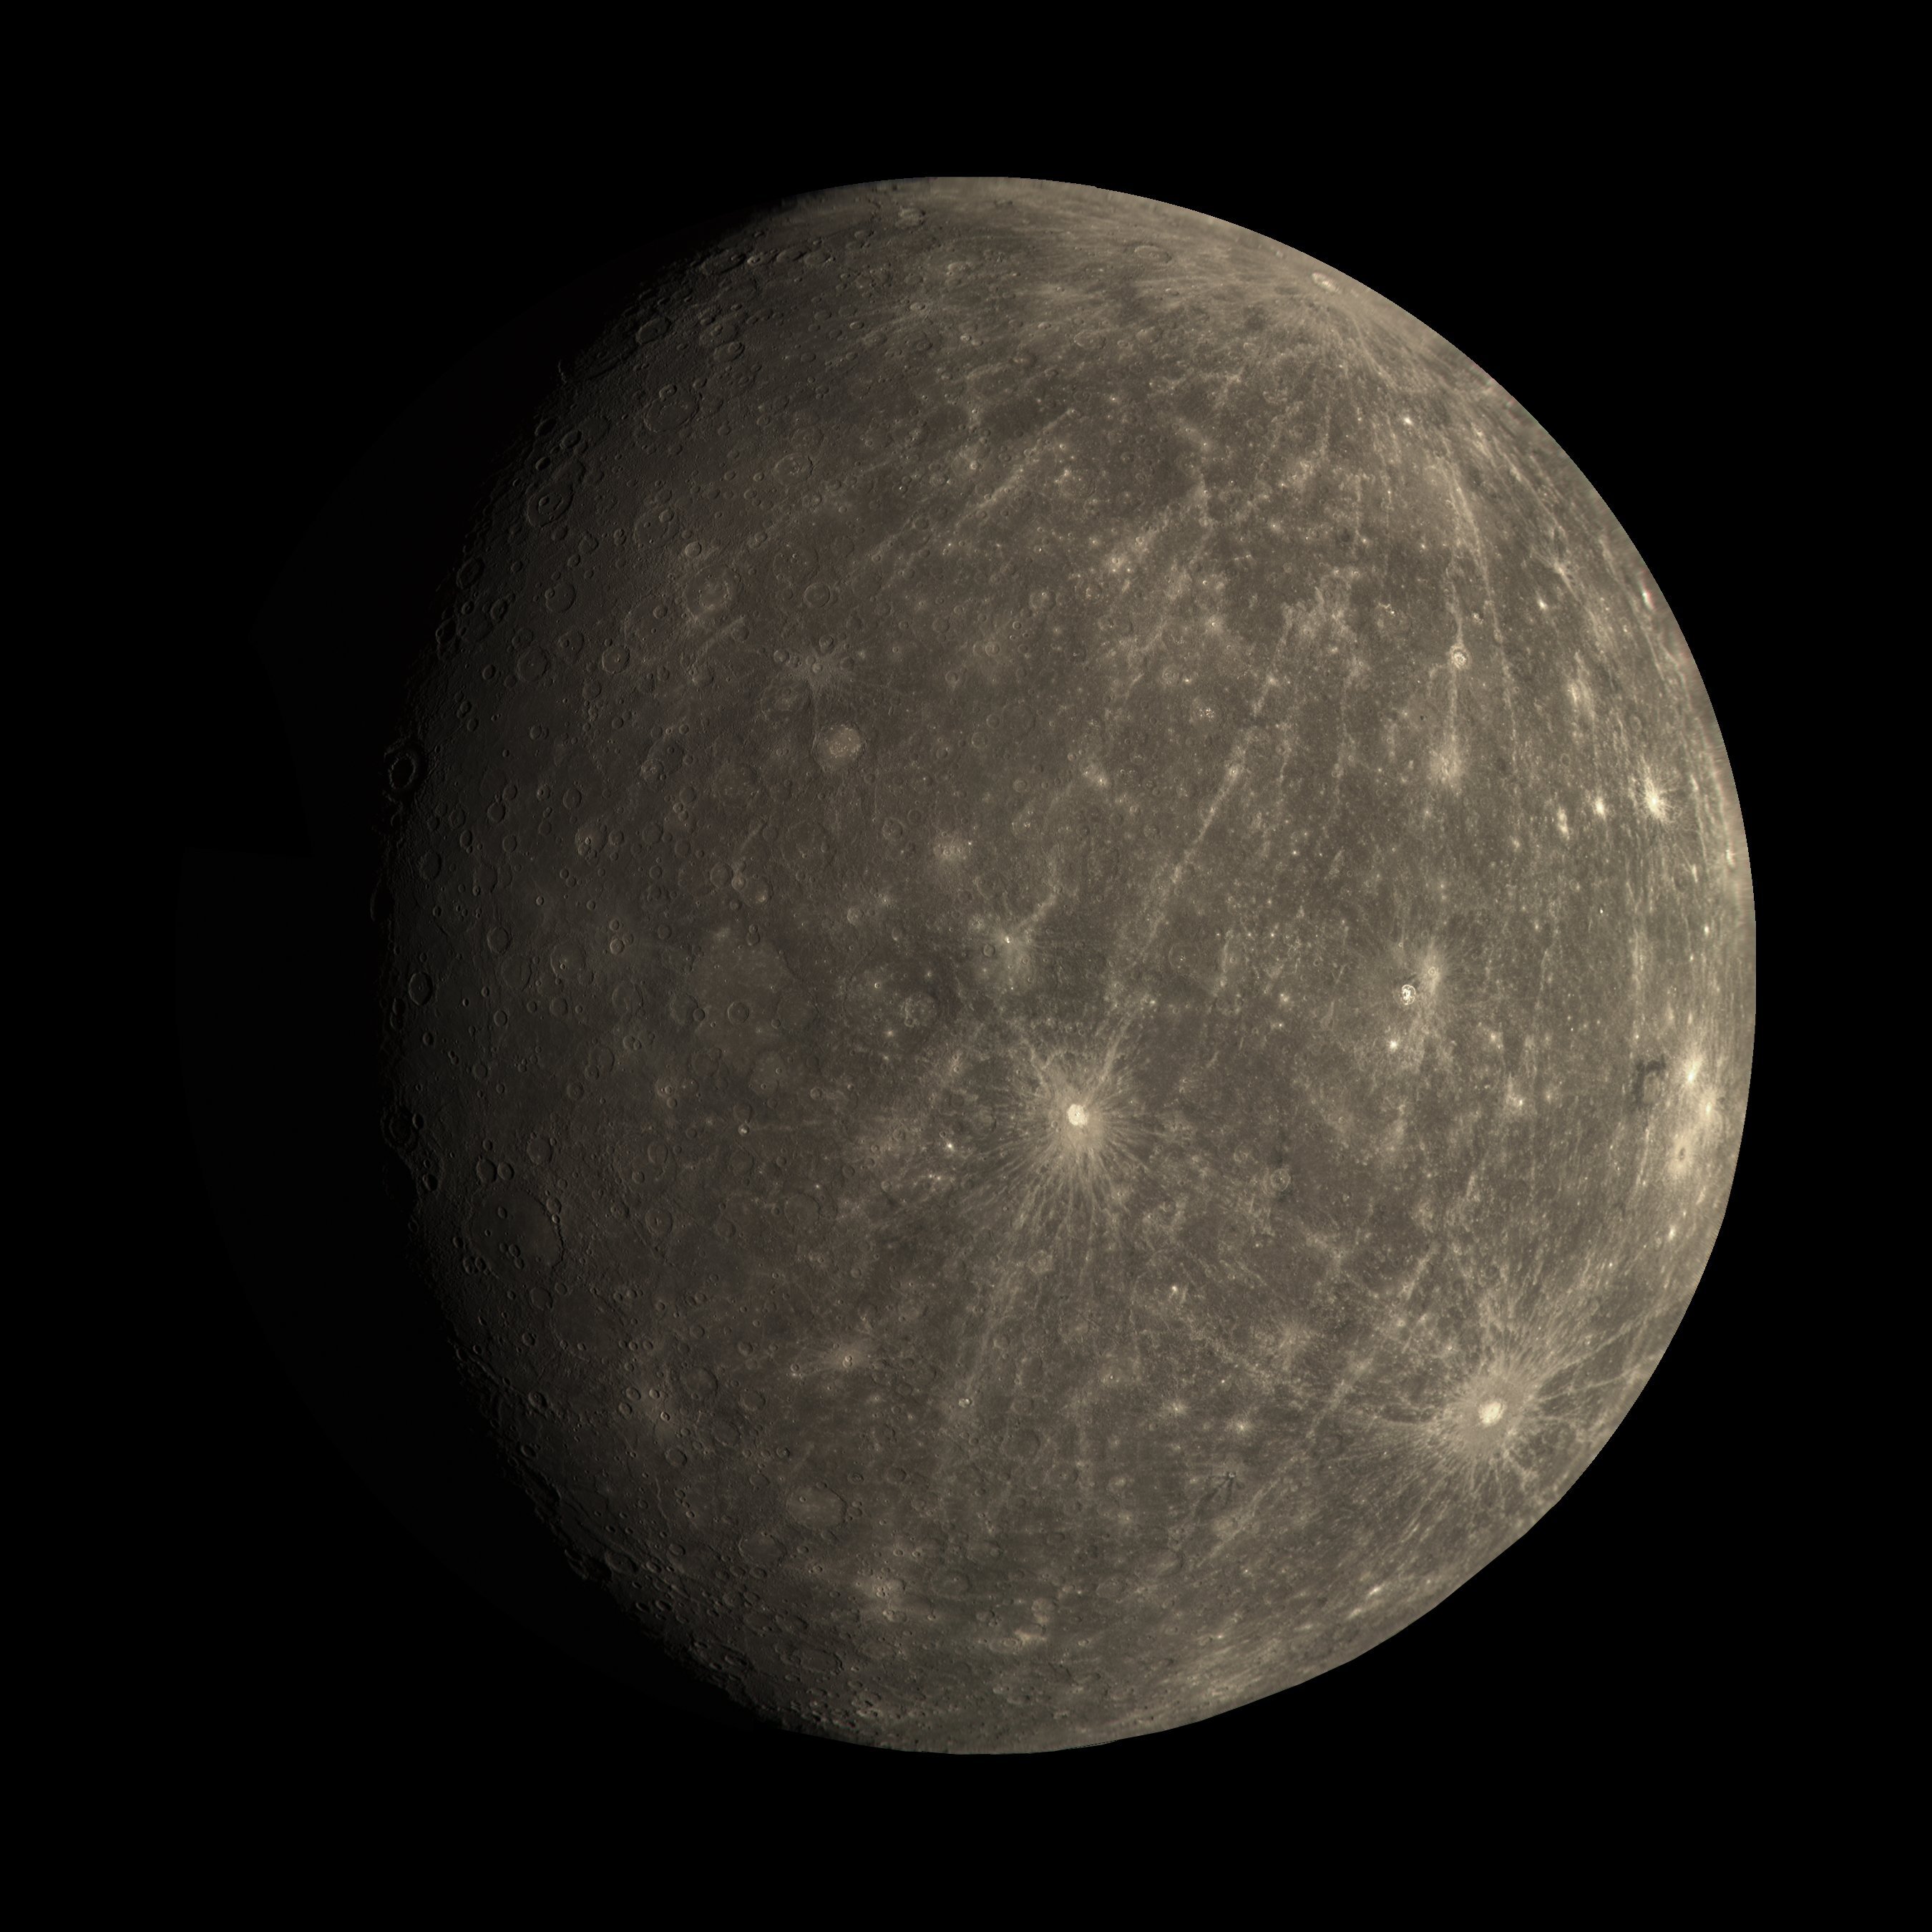 Mercury in color from MESSENGER | The Planetary Society